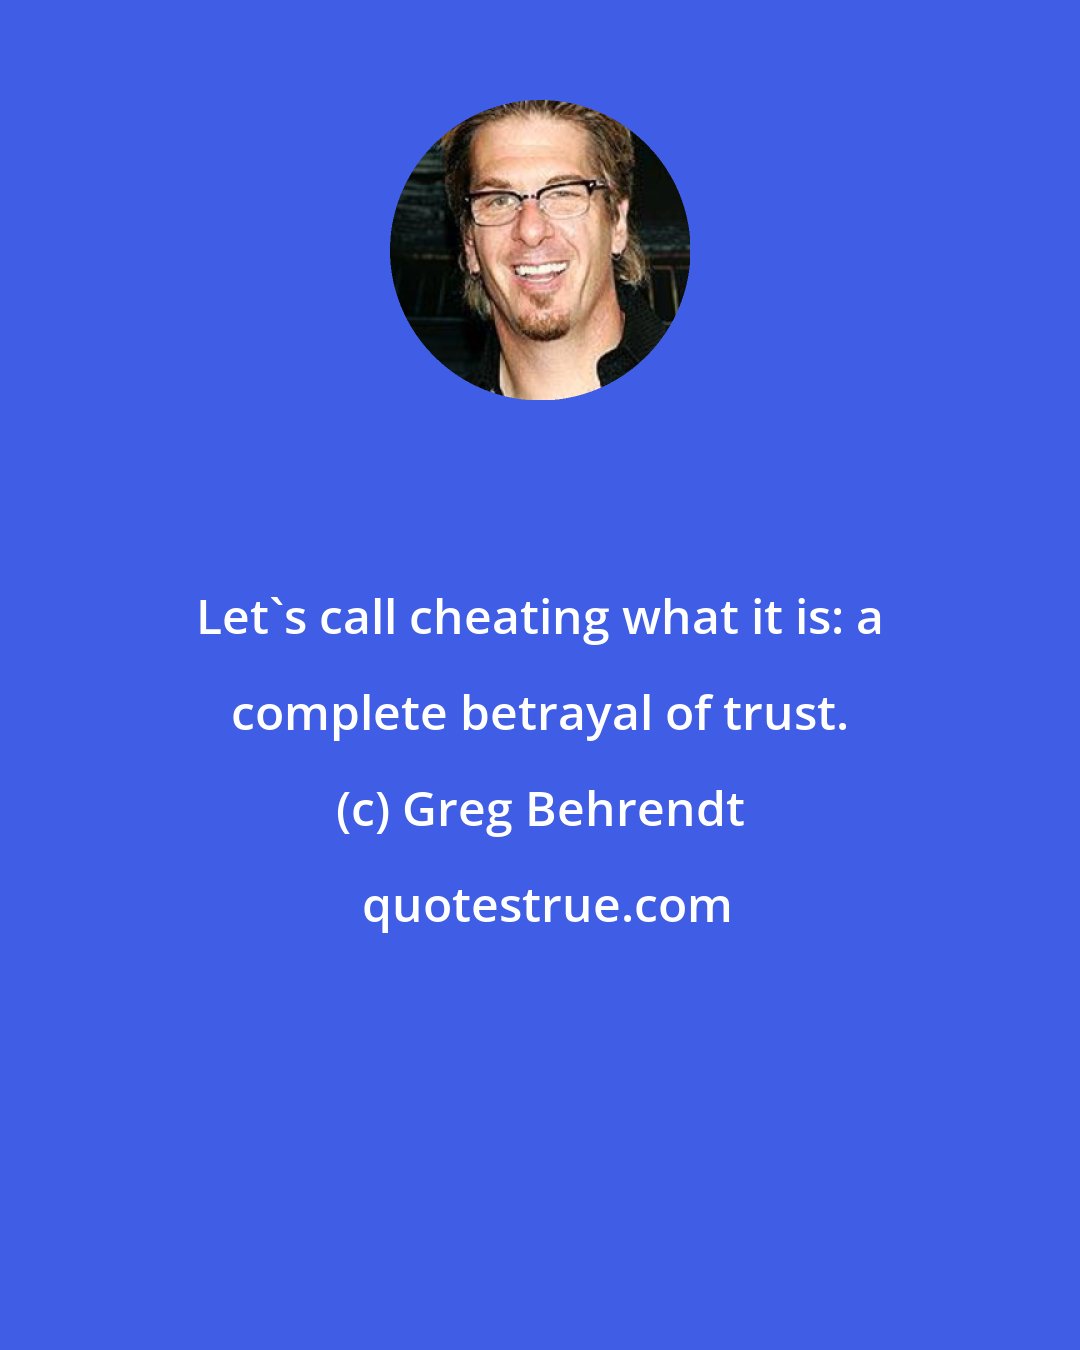 Greg Behrendt: Let's call cheating what it is: a complete betrayal of trust.